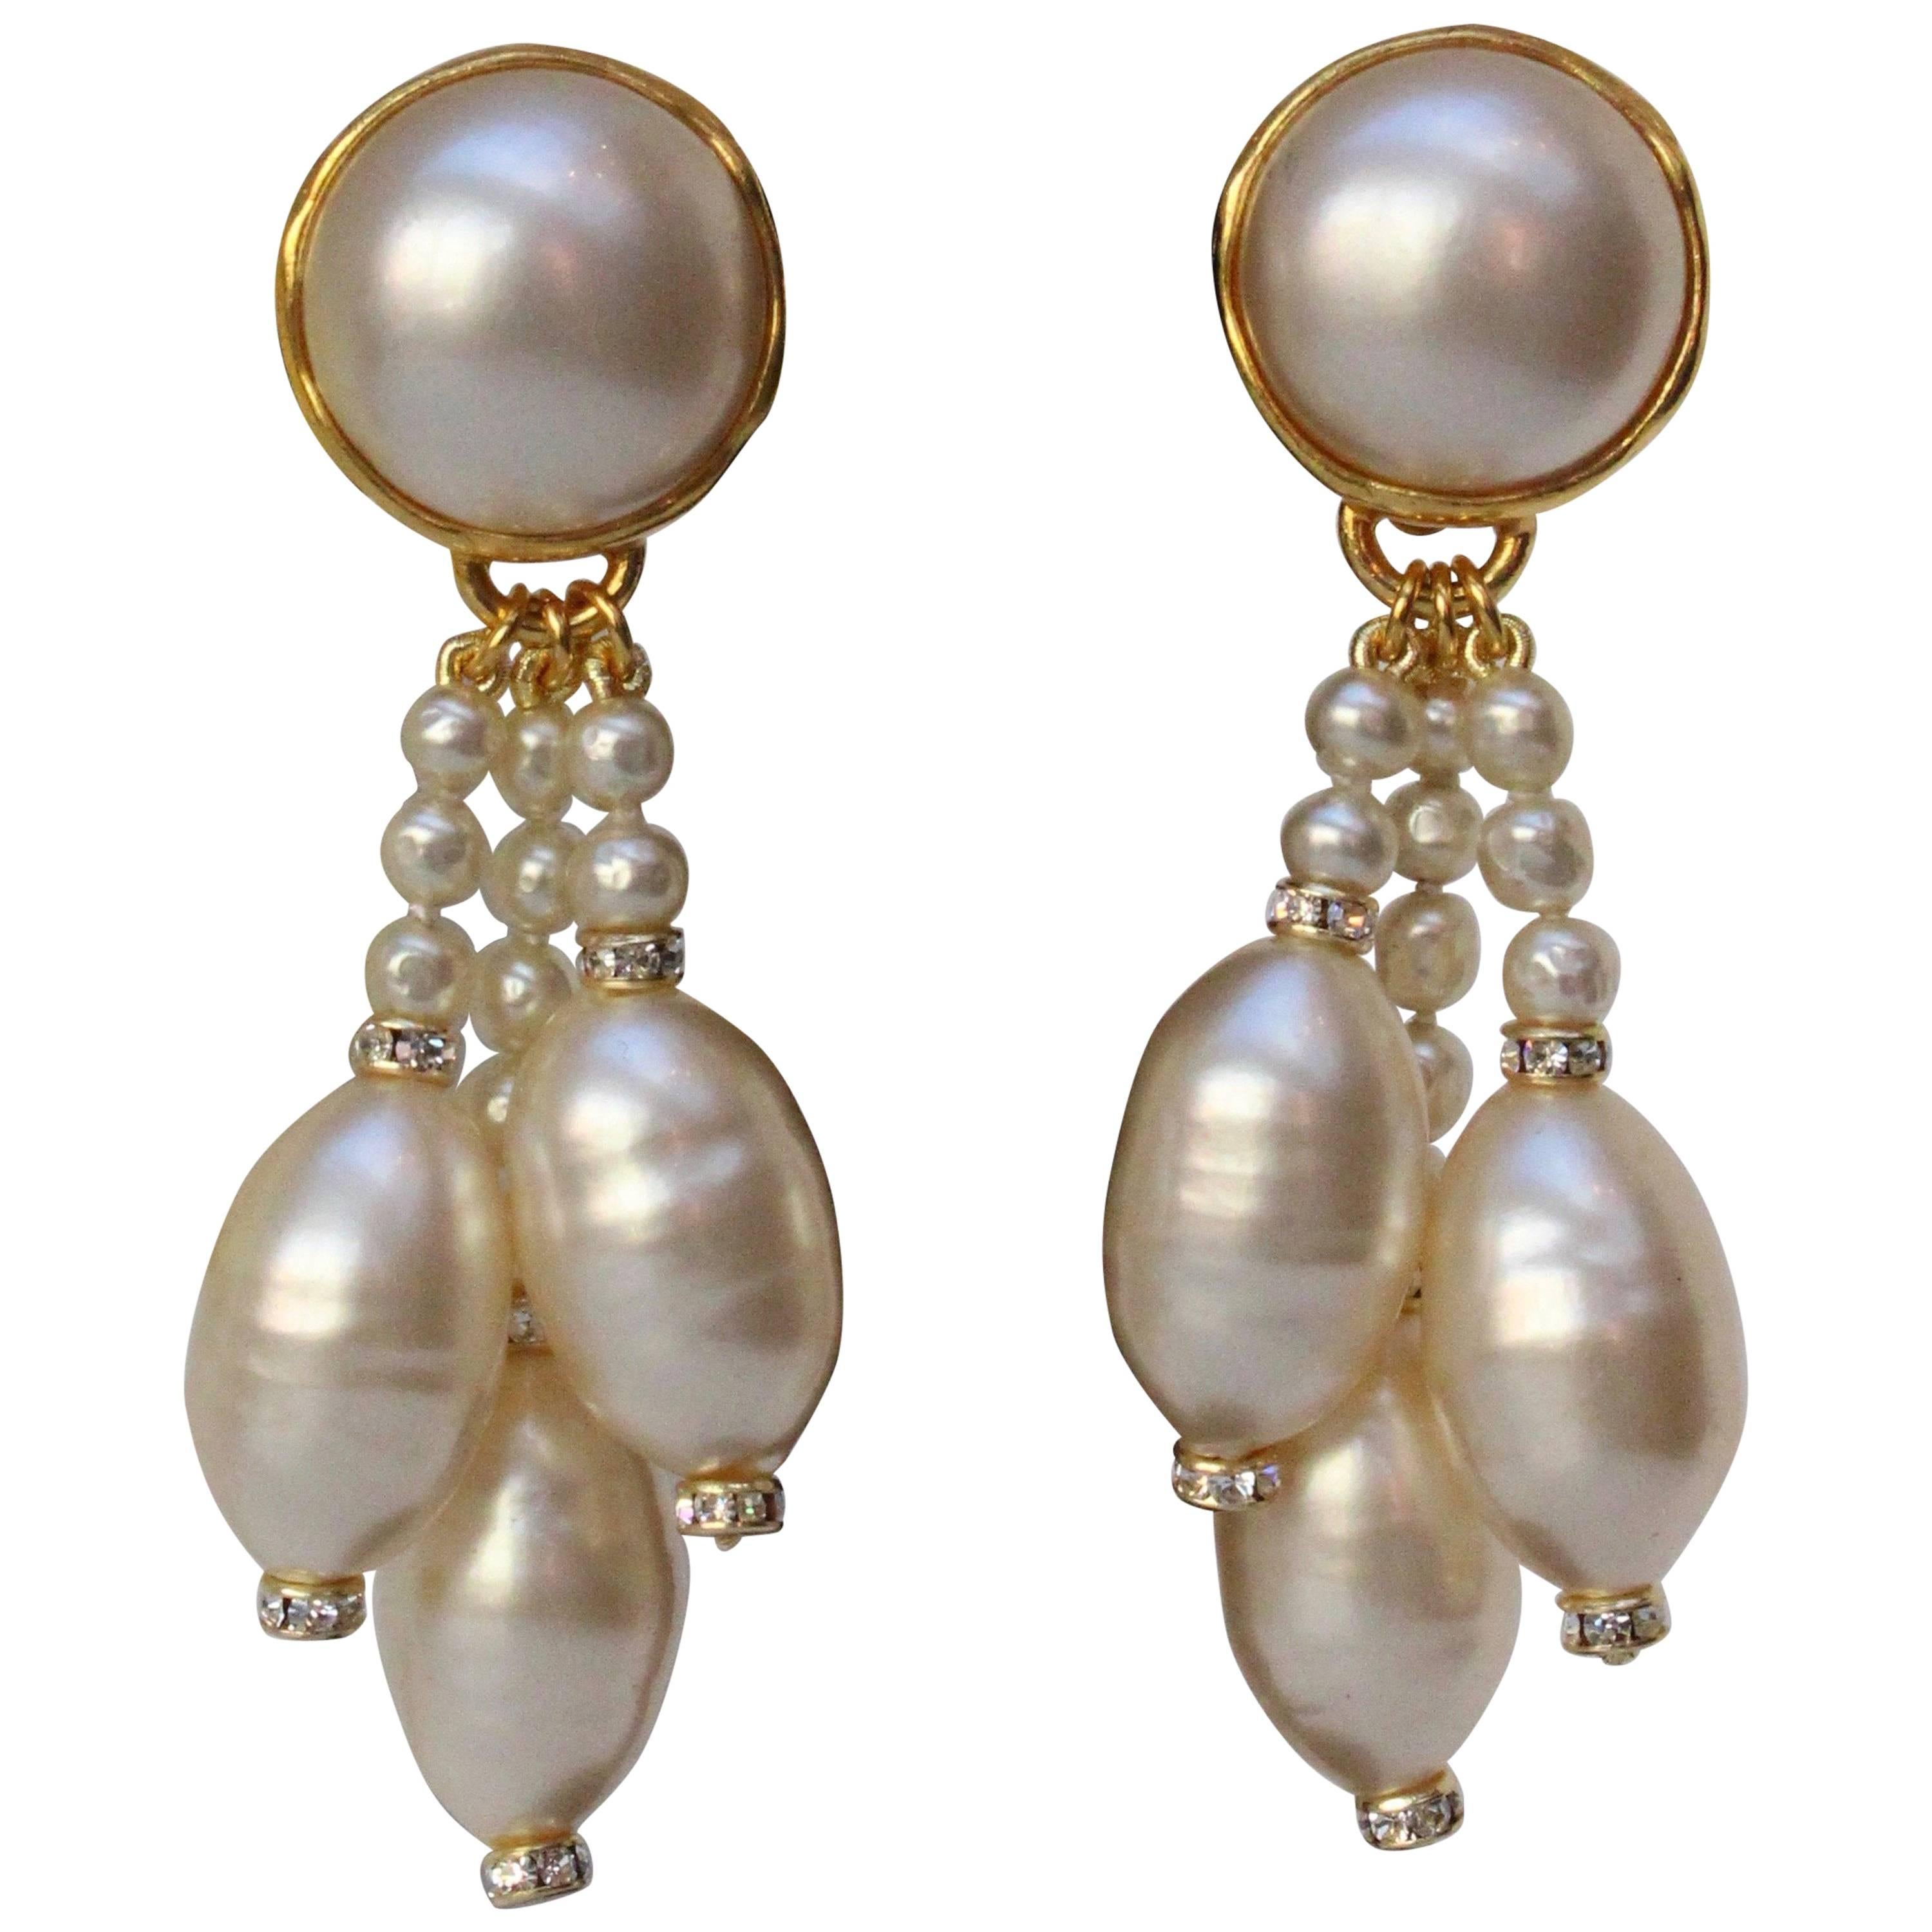 Chanel Fall Collection pearly earrings, 1994 